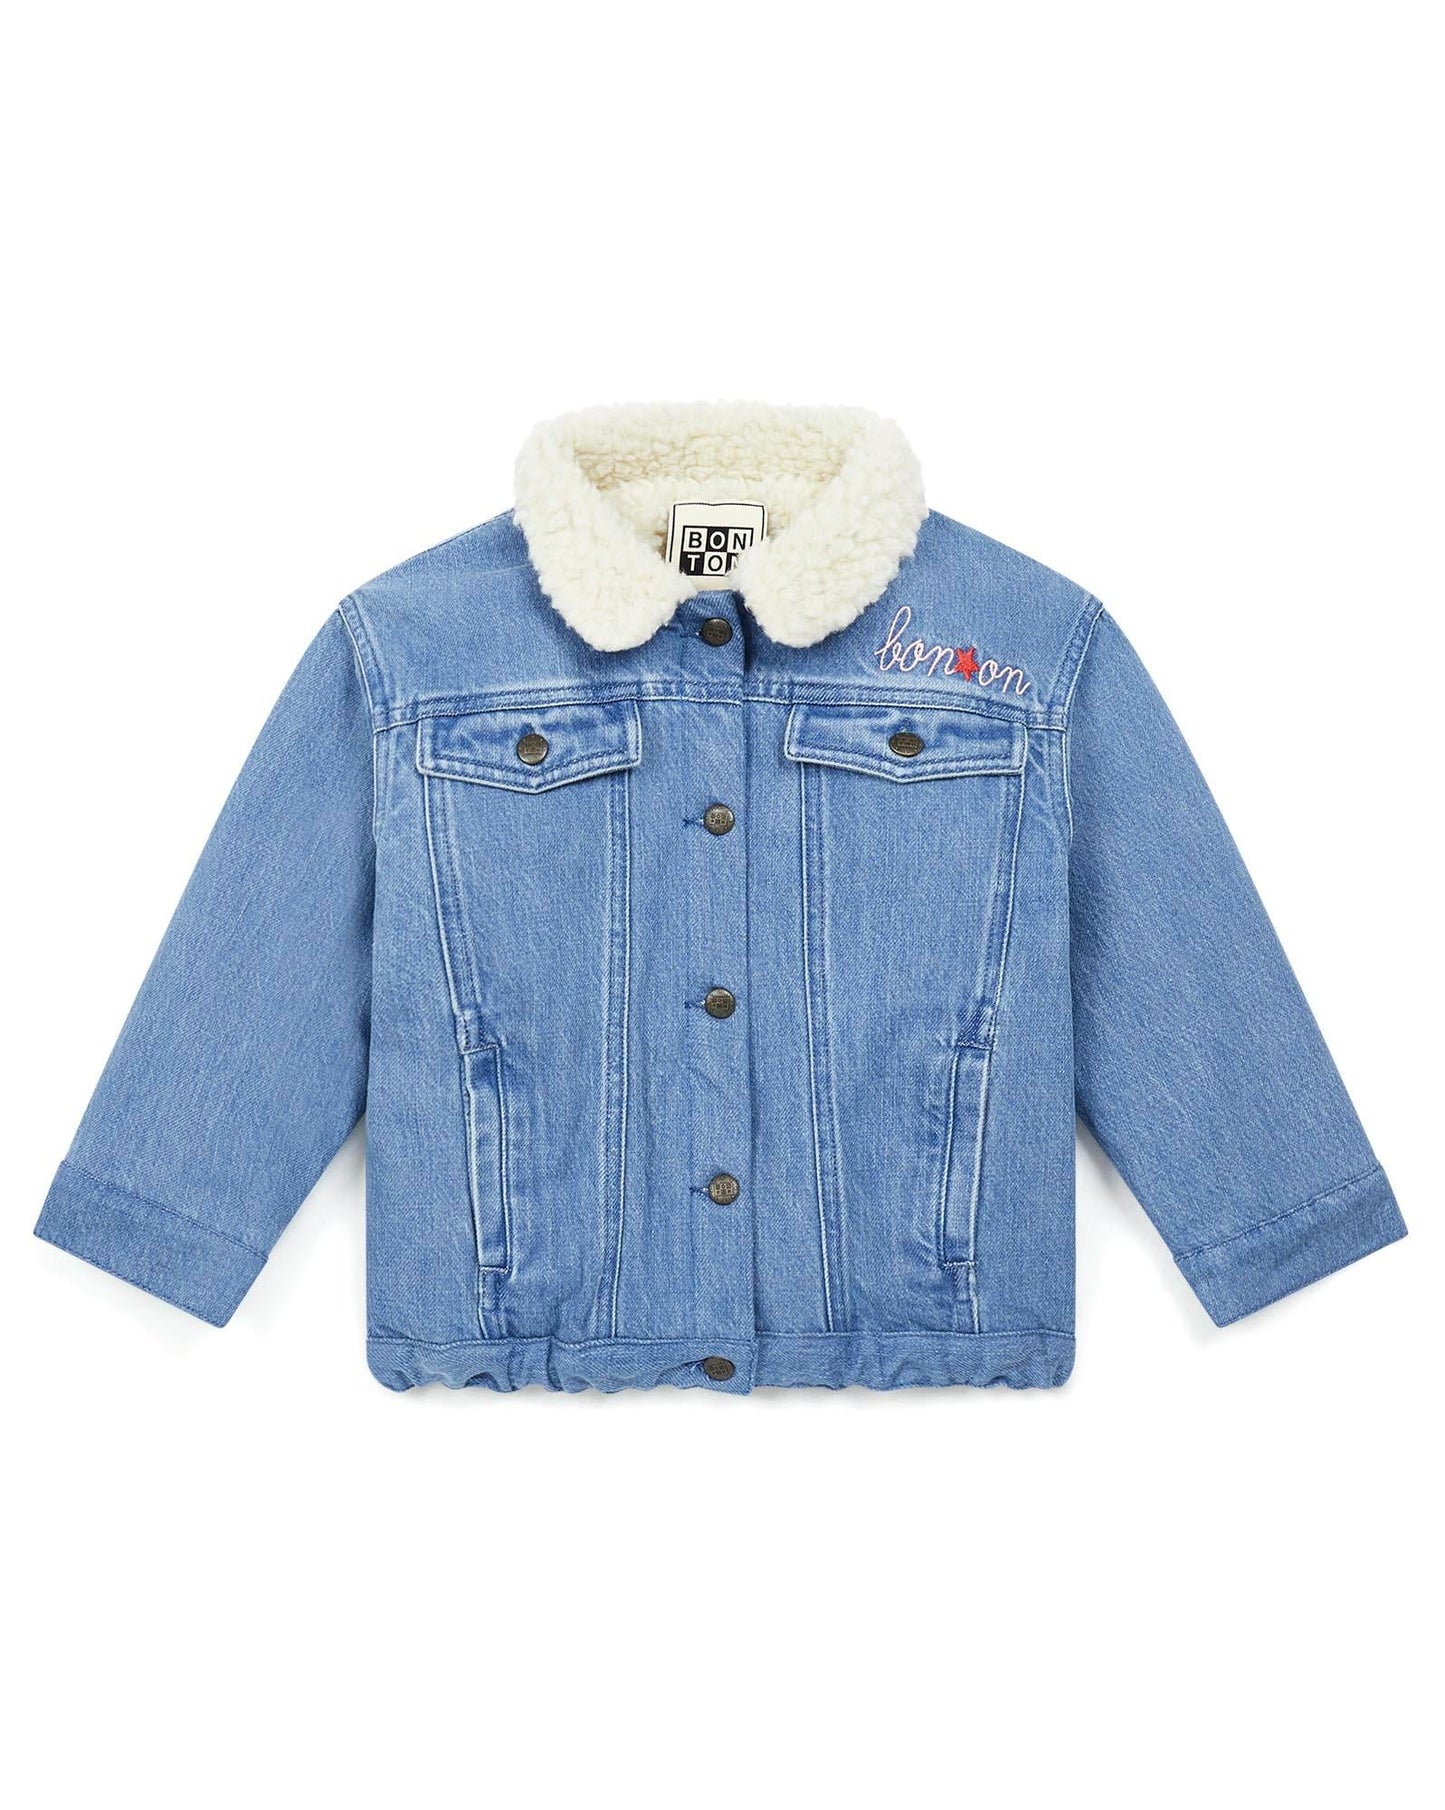 Jacket - Girl 100% cotton jeans